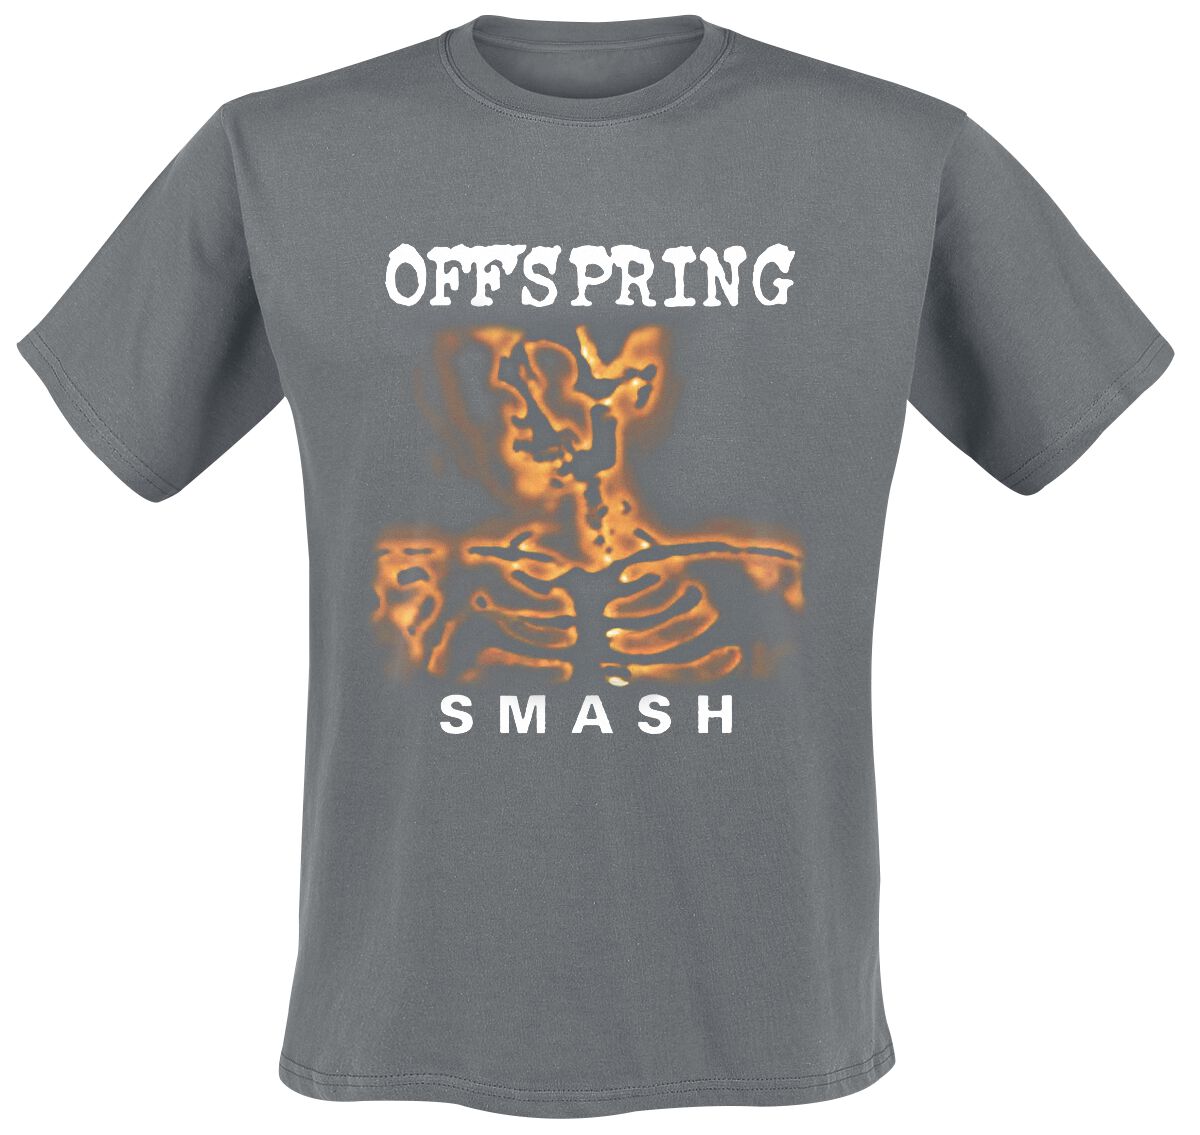 The Offspring Smash T-Shirt charcoal